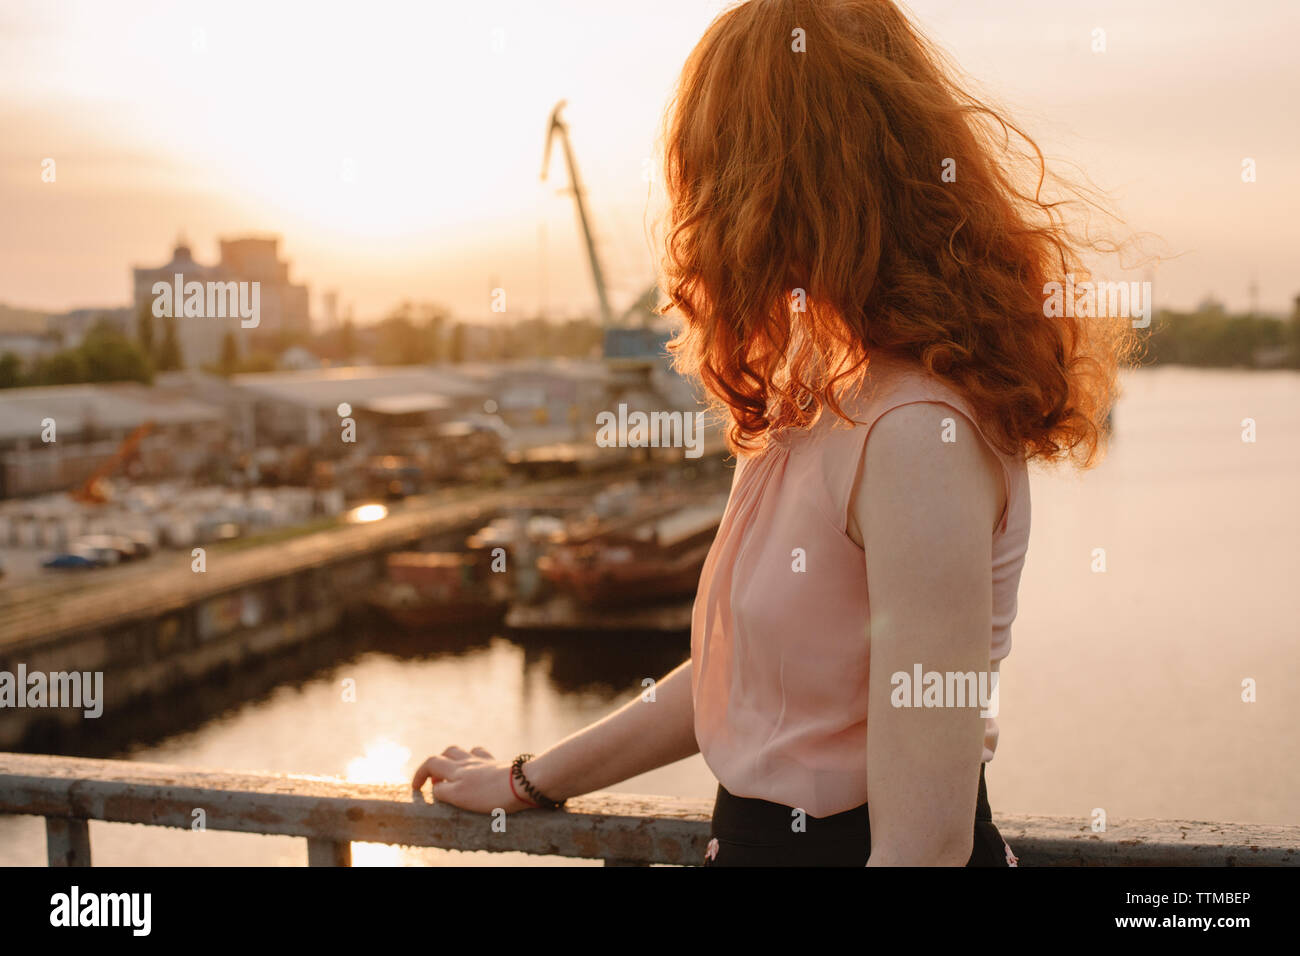 Young woman with red hair standing by railing on bridge at sunset Stock Photo